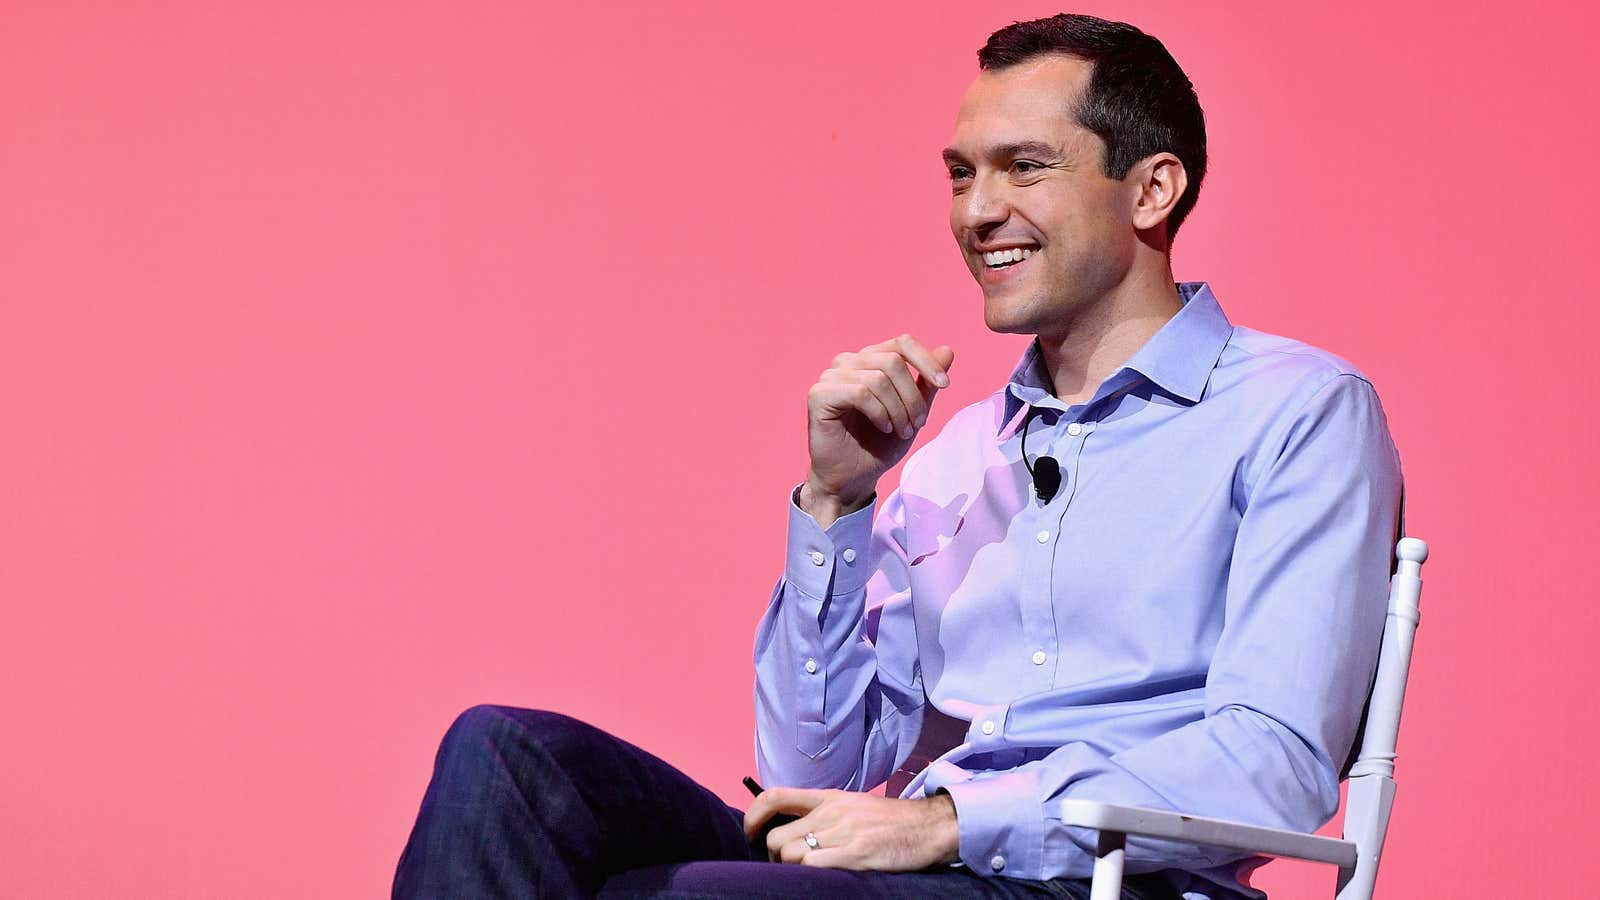 Airbnb isn’t worried about a recession, says Airbnb cofounder